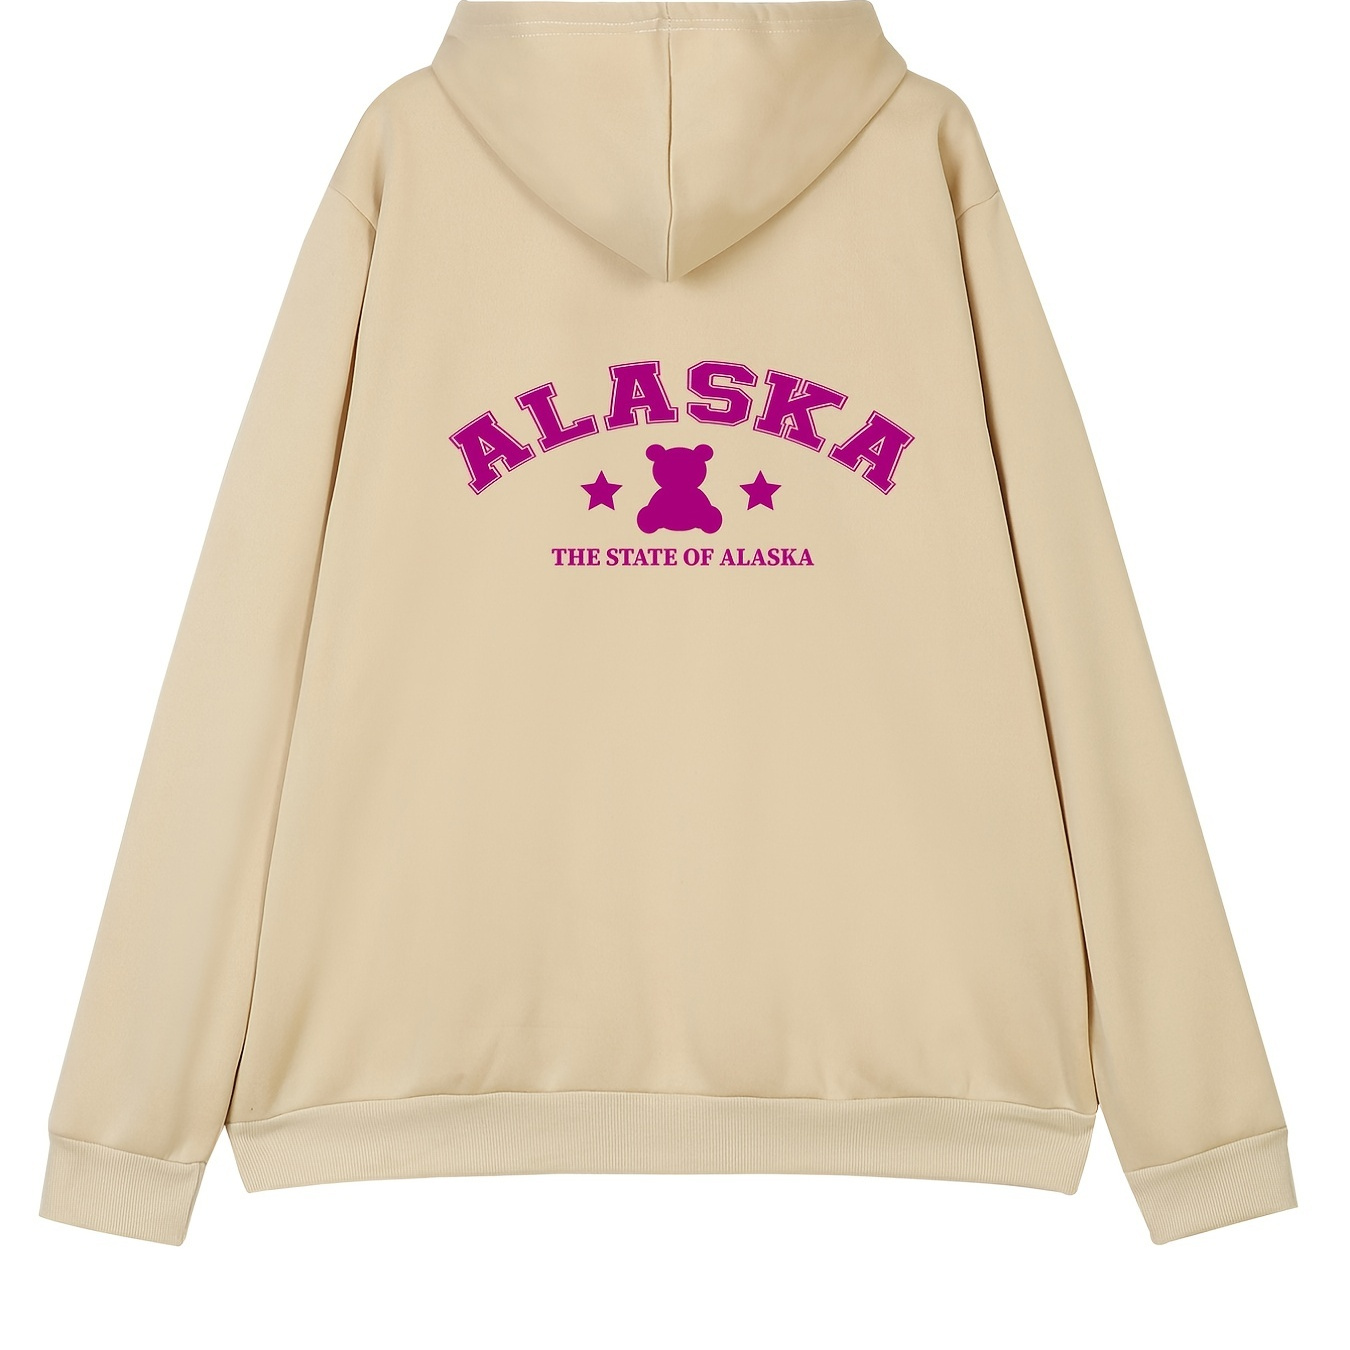 

Men's Plus Size "alaska" Plain Color Warm Fleece Full Zipper Hoodie, Loose Drawstring Hooded Sweatshirt Jacket With Pockets, Oversized Long Sleeve Clothing For Big And Tall Guys